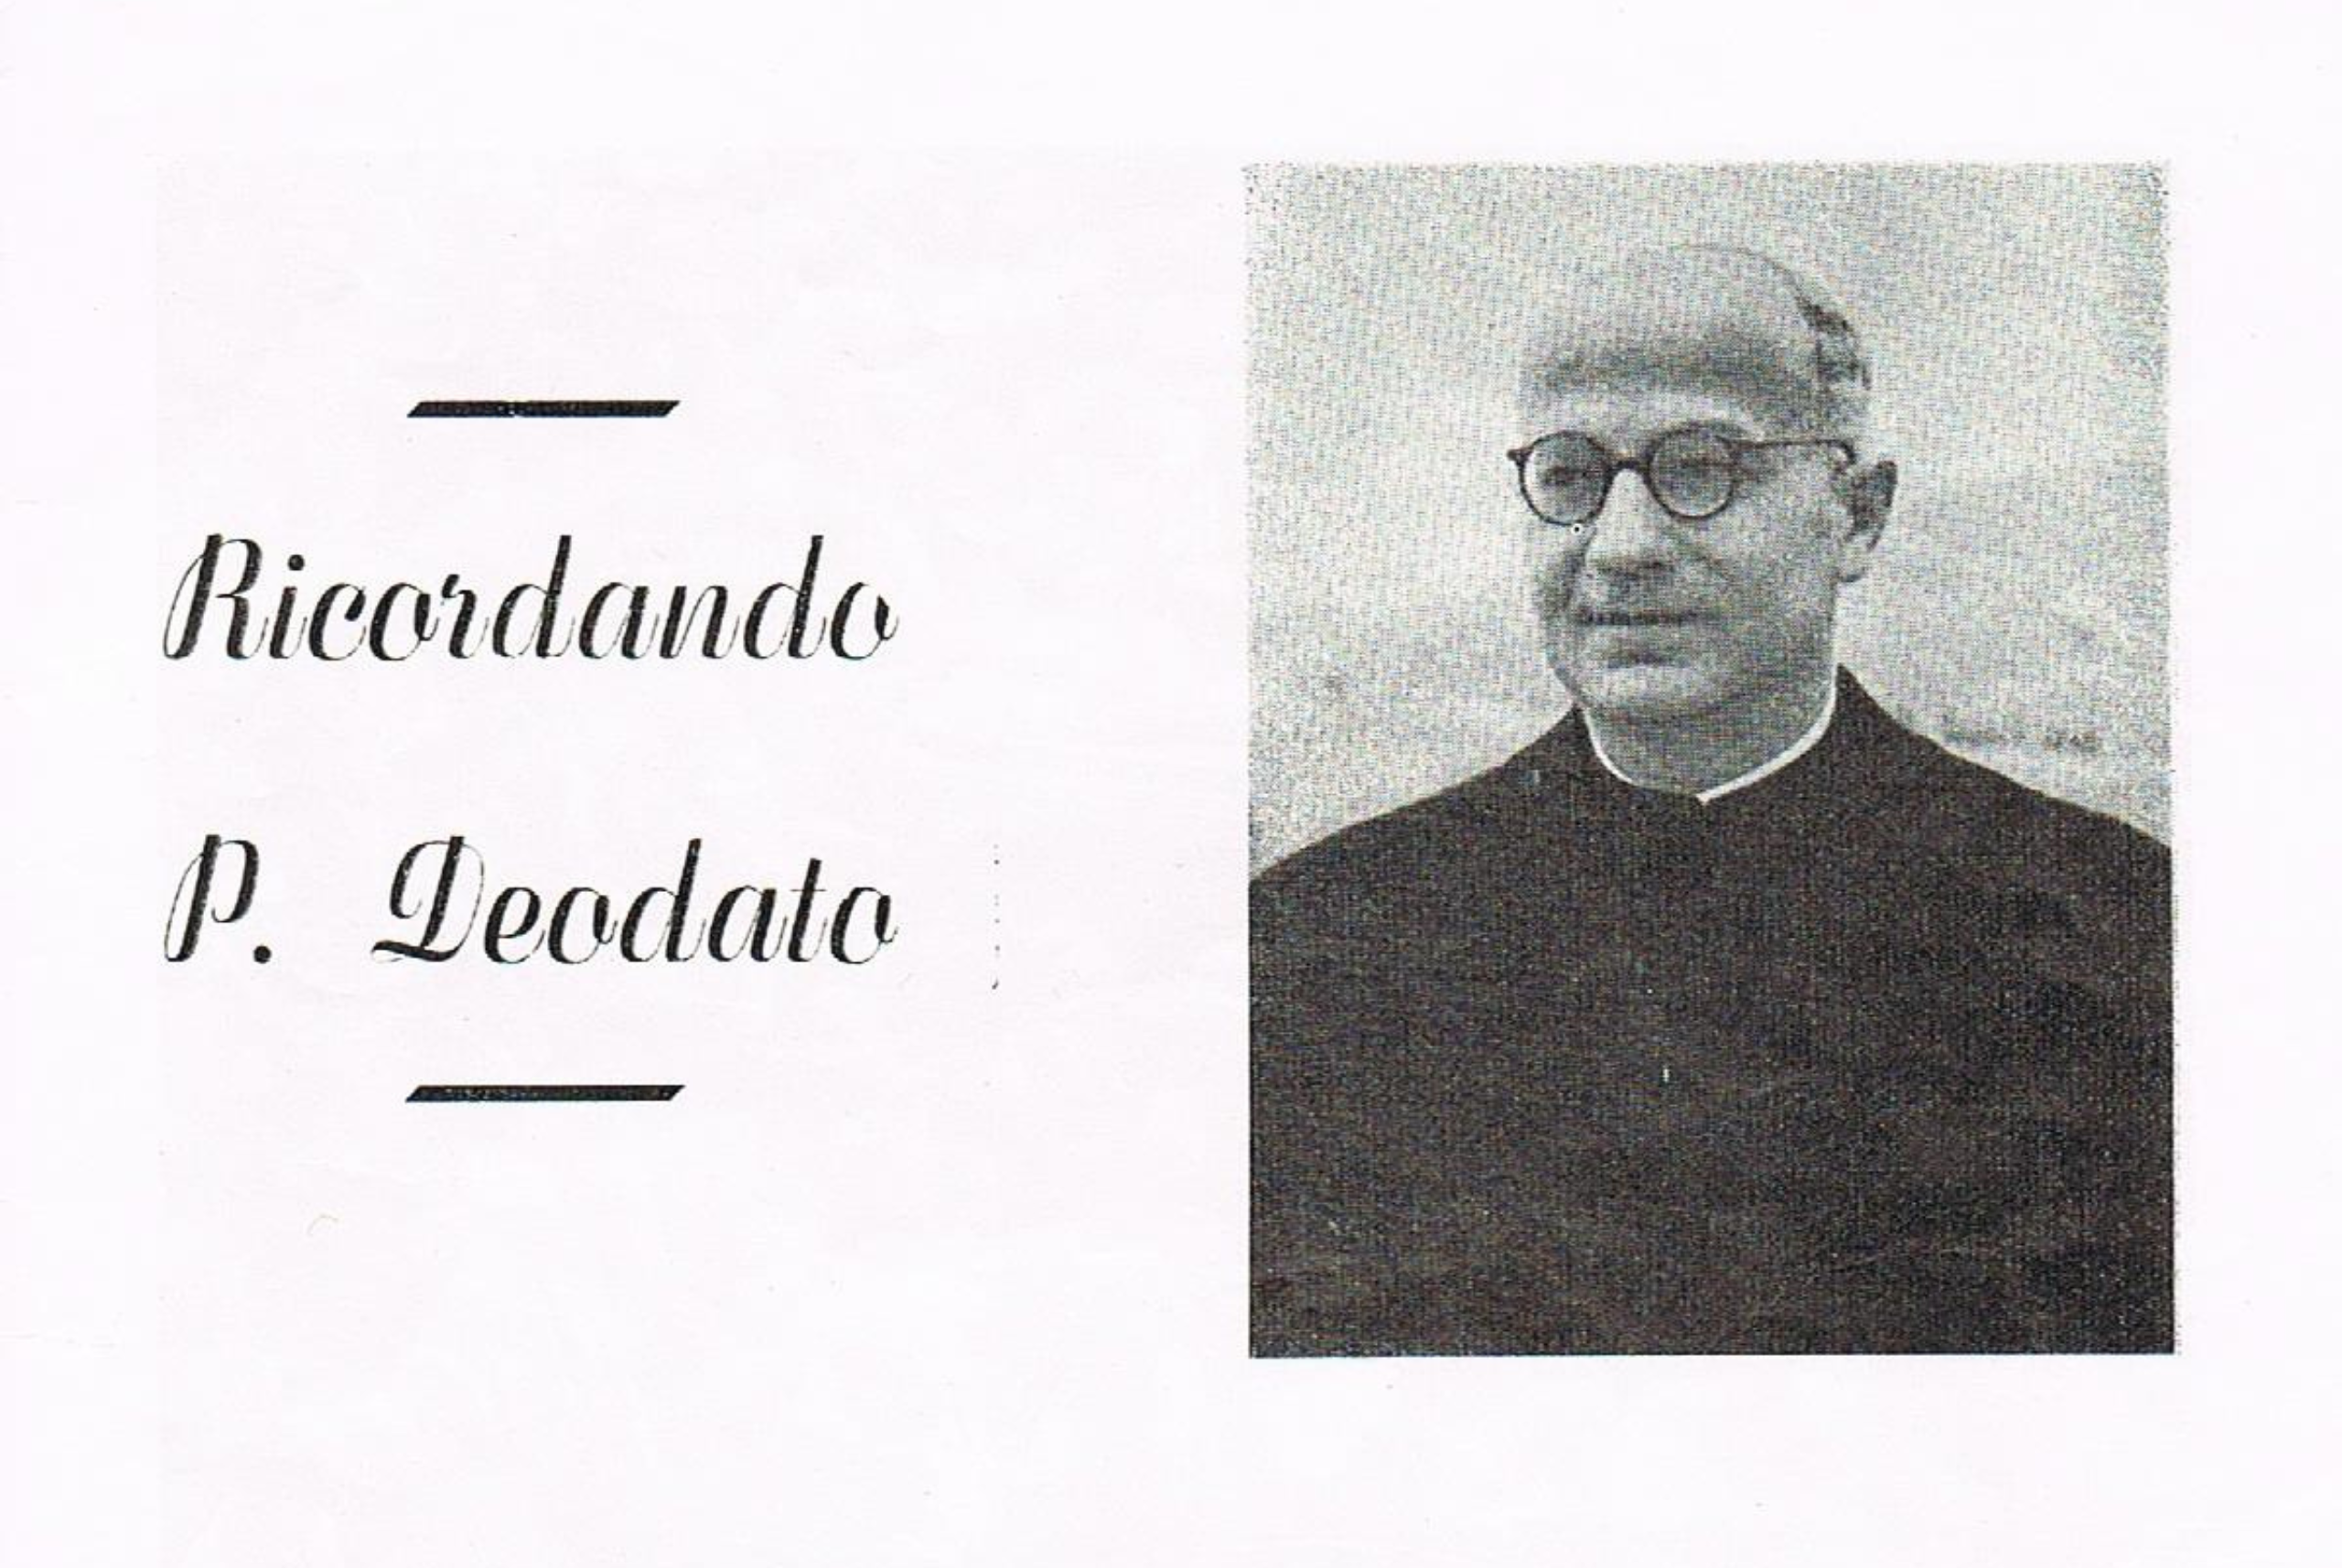 In Mussomeli, a street dedicated to Father Enrico Deodato